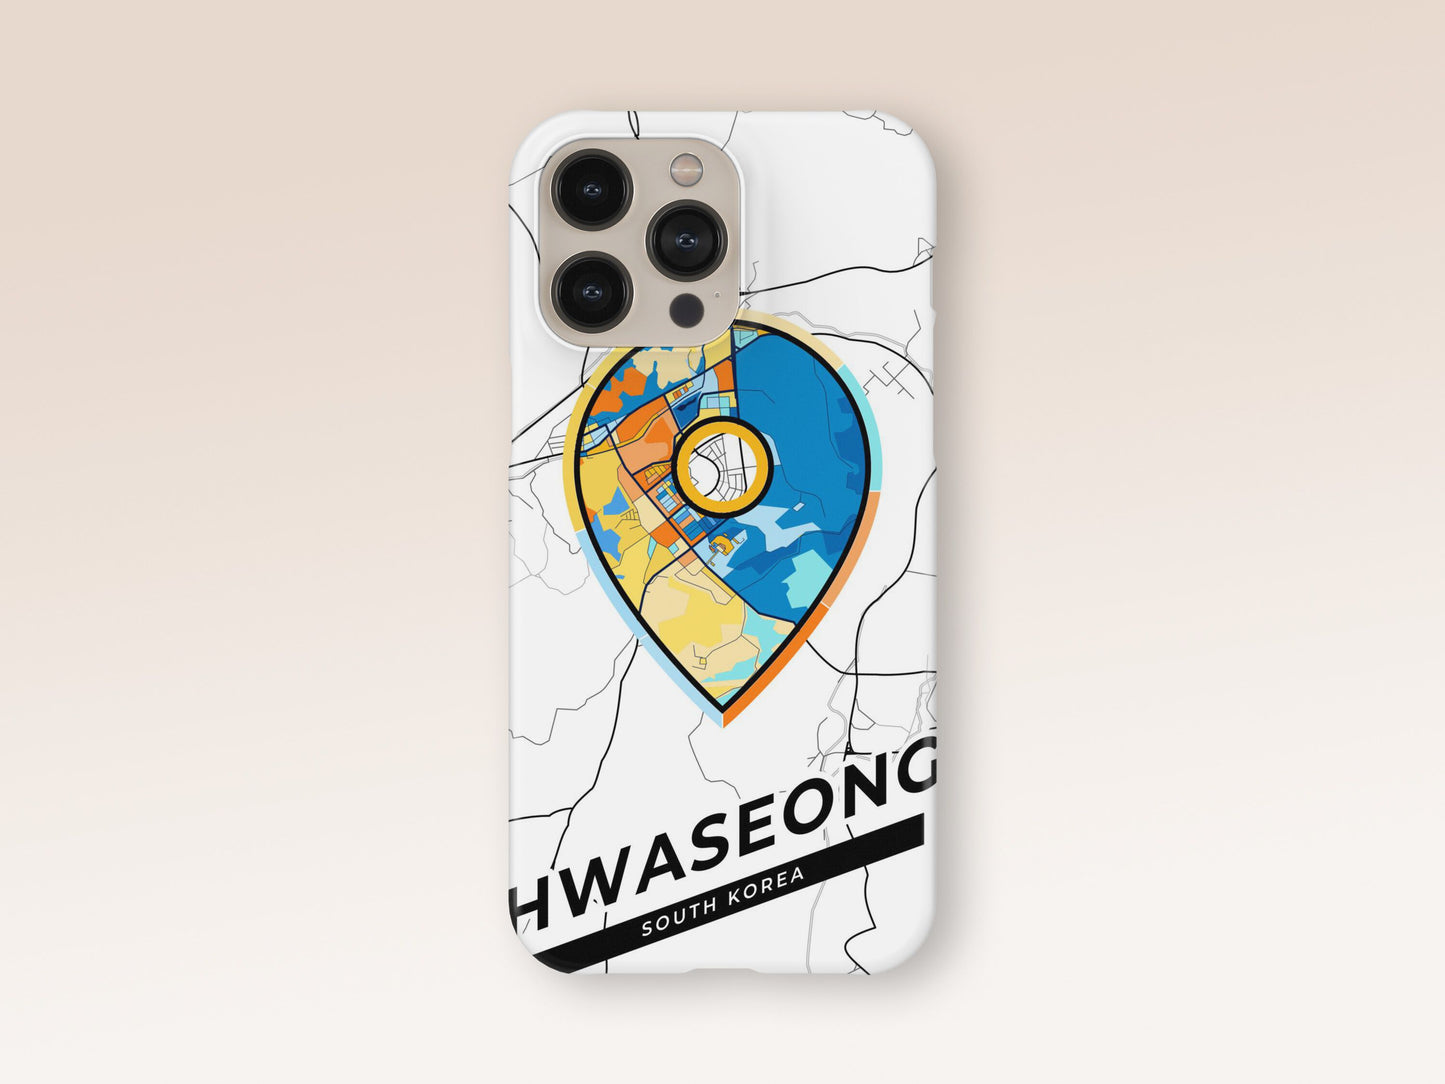 Hwaseong South Korea slim phone case with colorful icon. Birthday, wedding or housewarming gift. Couple match cases. 1